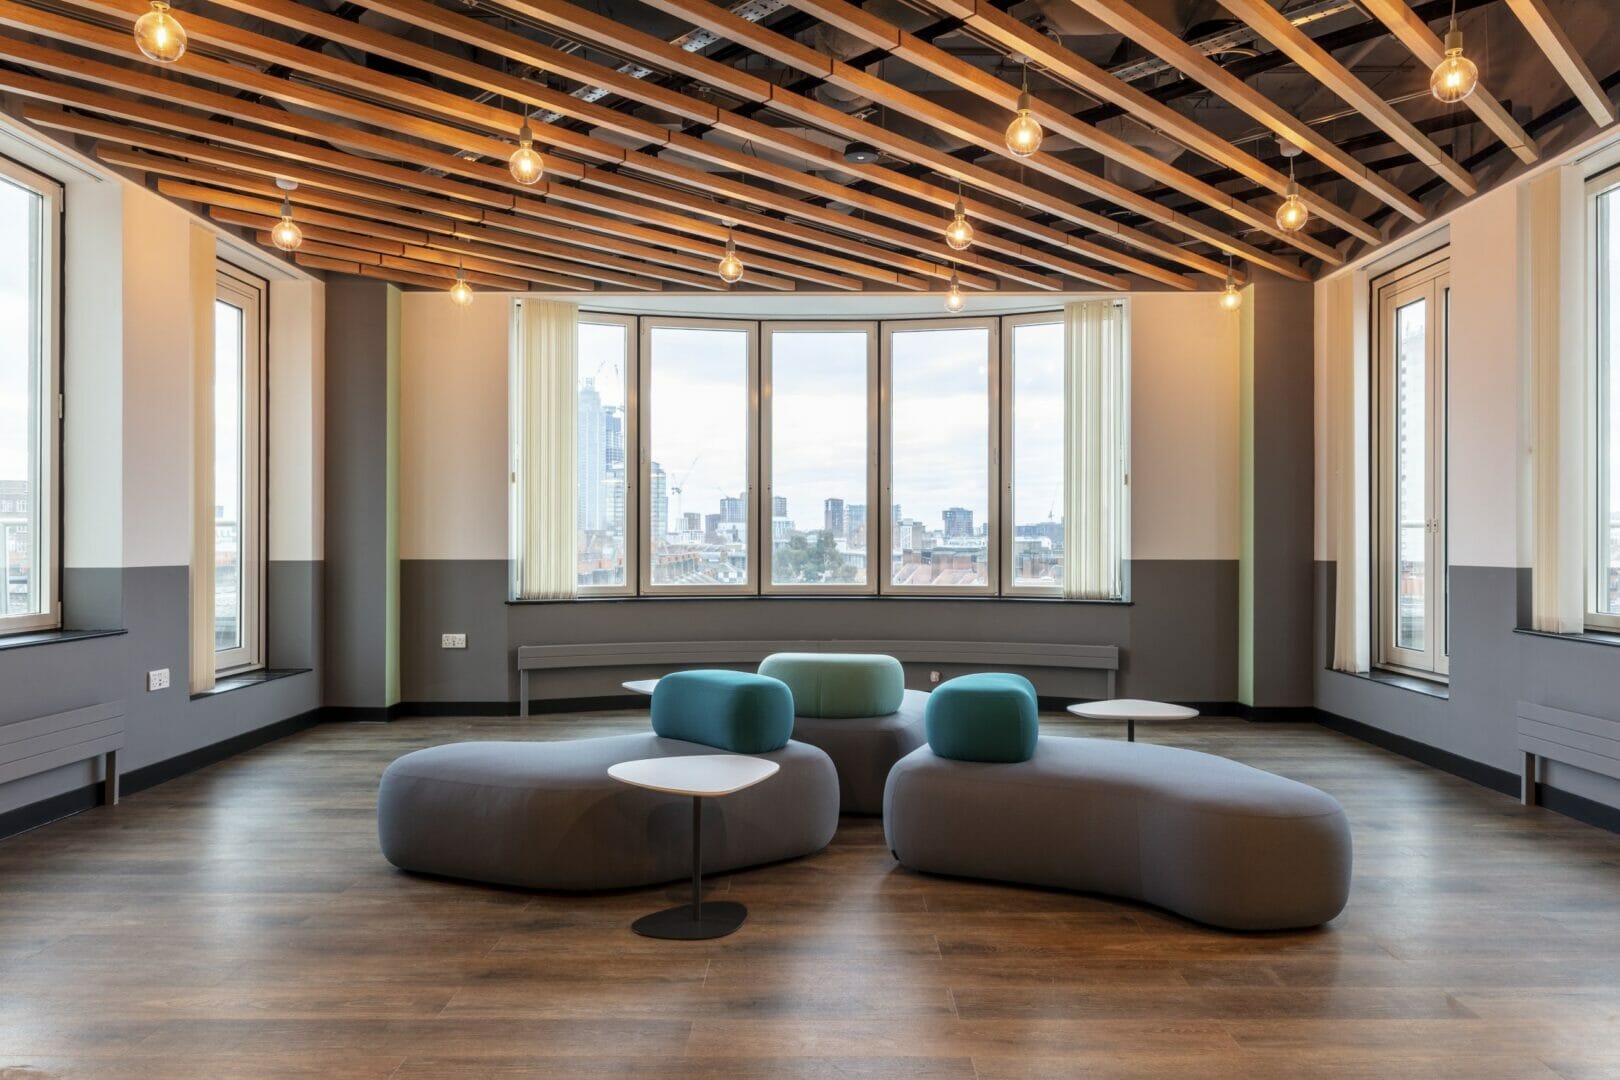 BW: Workplace Experts has created a modern workspace for civil servants with the revival of Government building in Westminster @wearebwlondon